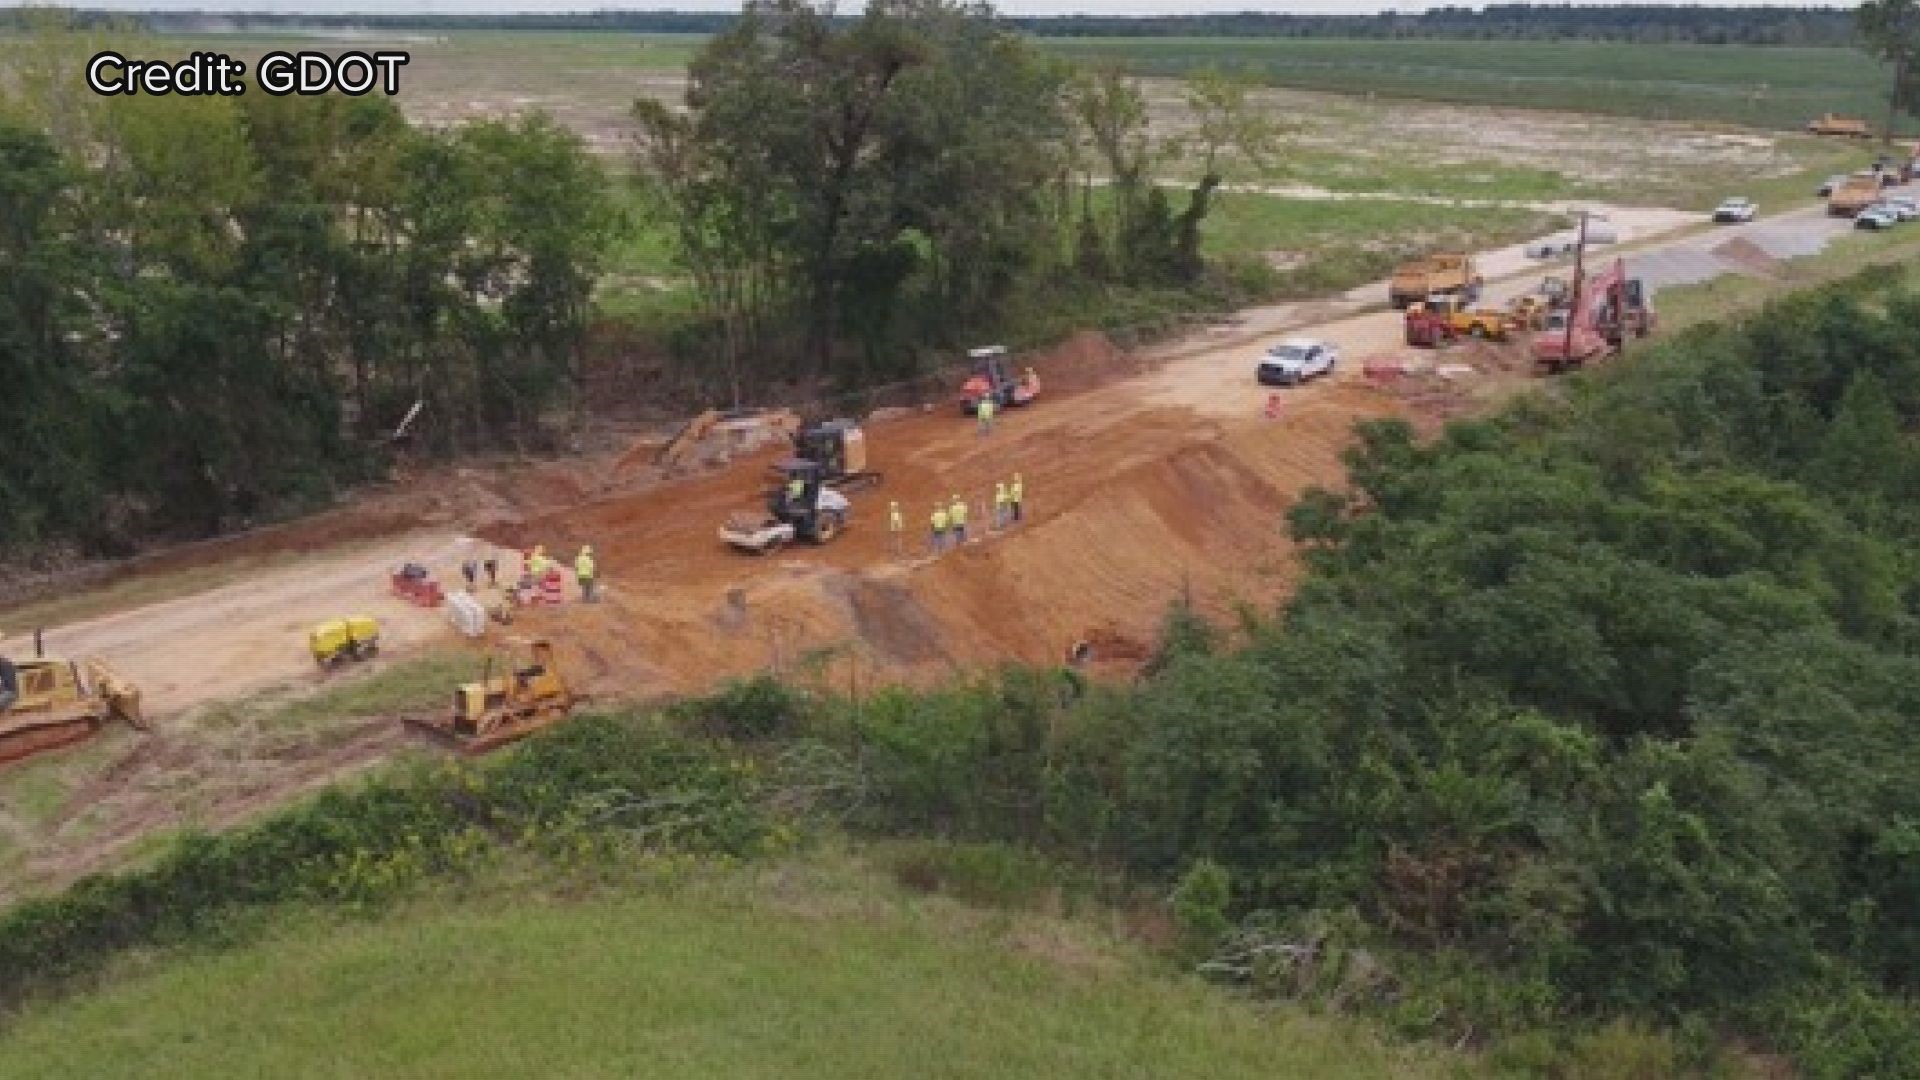 Crews fixed the gaping holes along the stretch of road between Davisboro and Sandersville in half the time that was expected to complete the project.